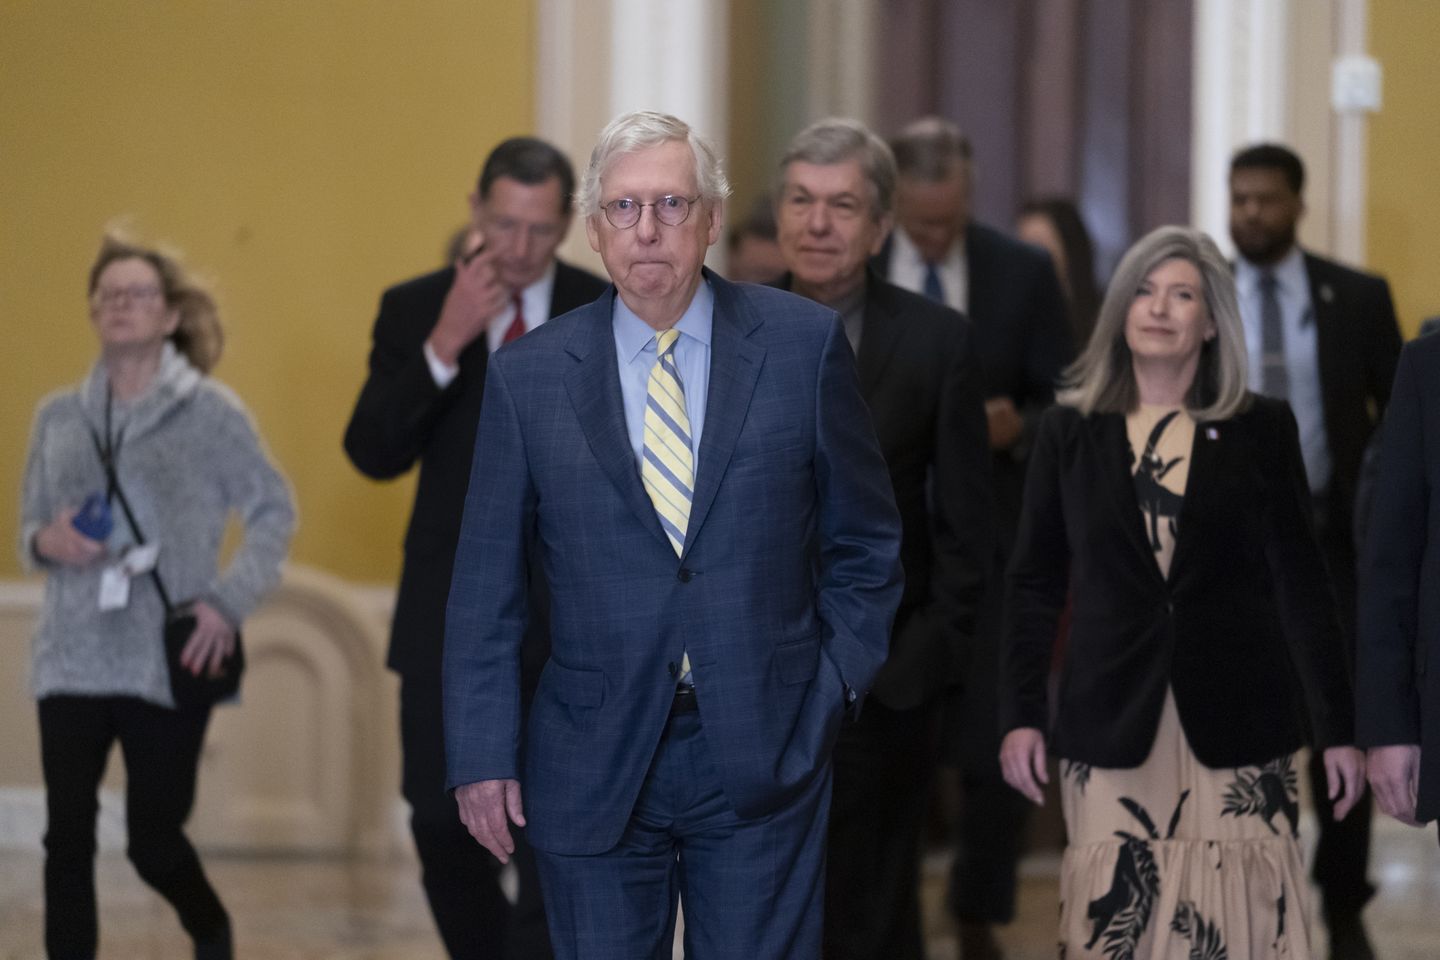 Conservatives balk at $1.7 trillion spending deal but McConnell says it's as good as it gets